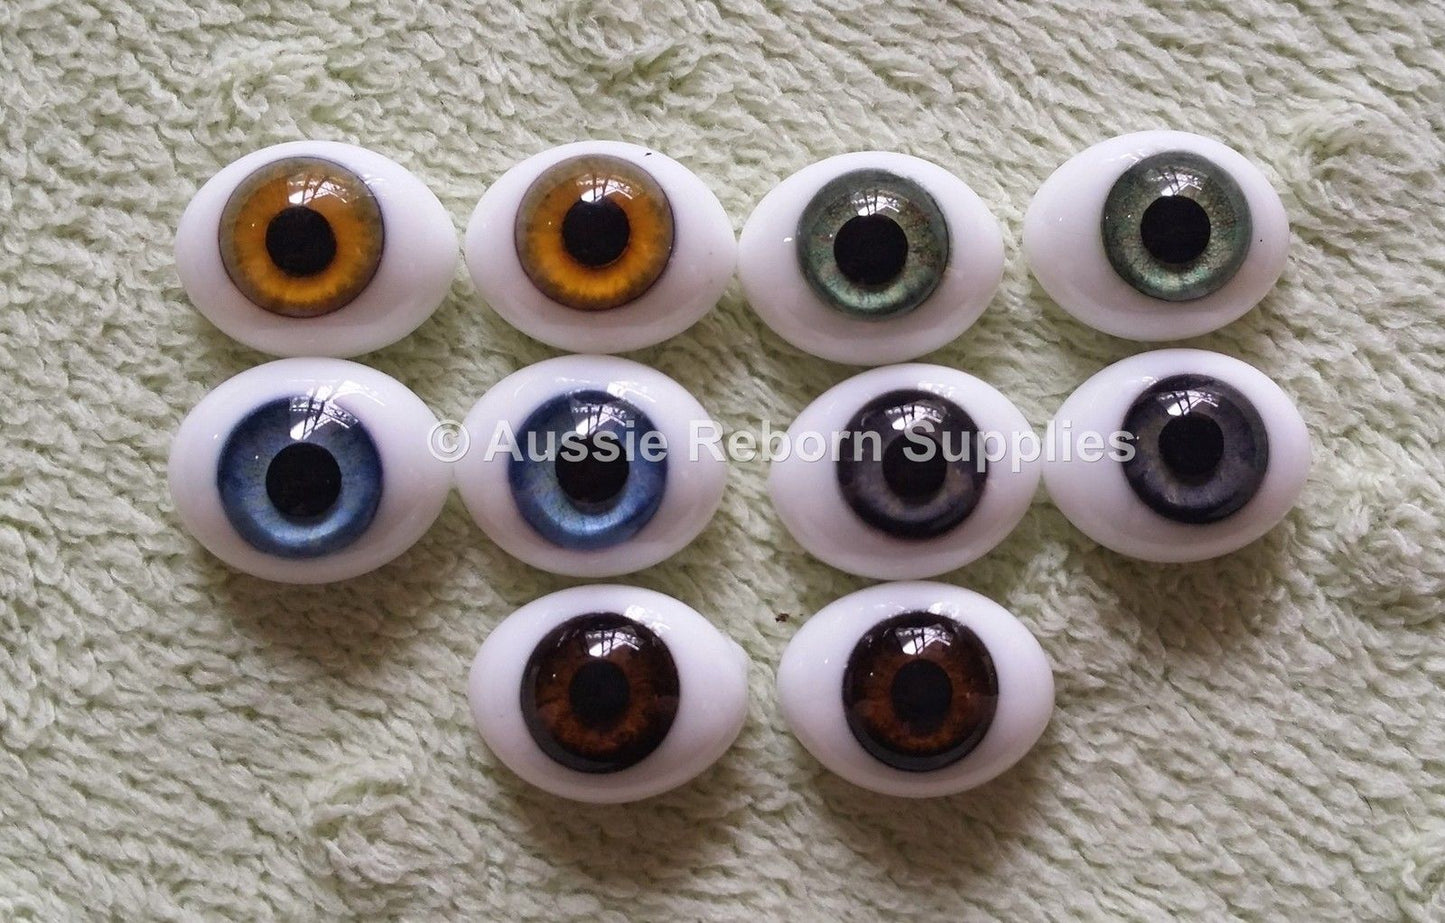 22mm Grey Blue Oval Glass Eyes Reborn Baby Doll Making Supplies